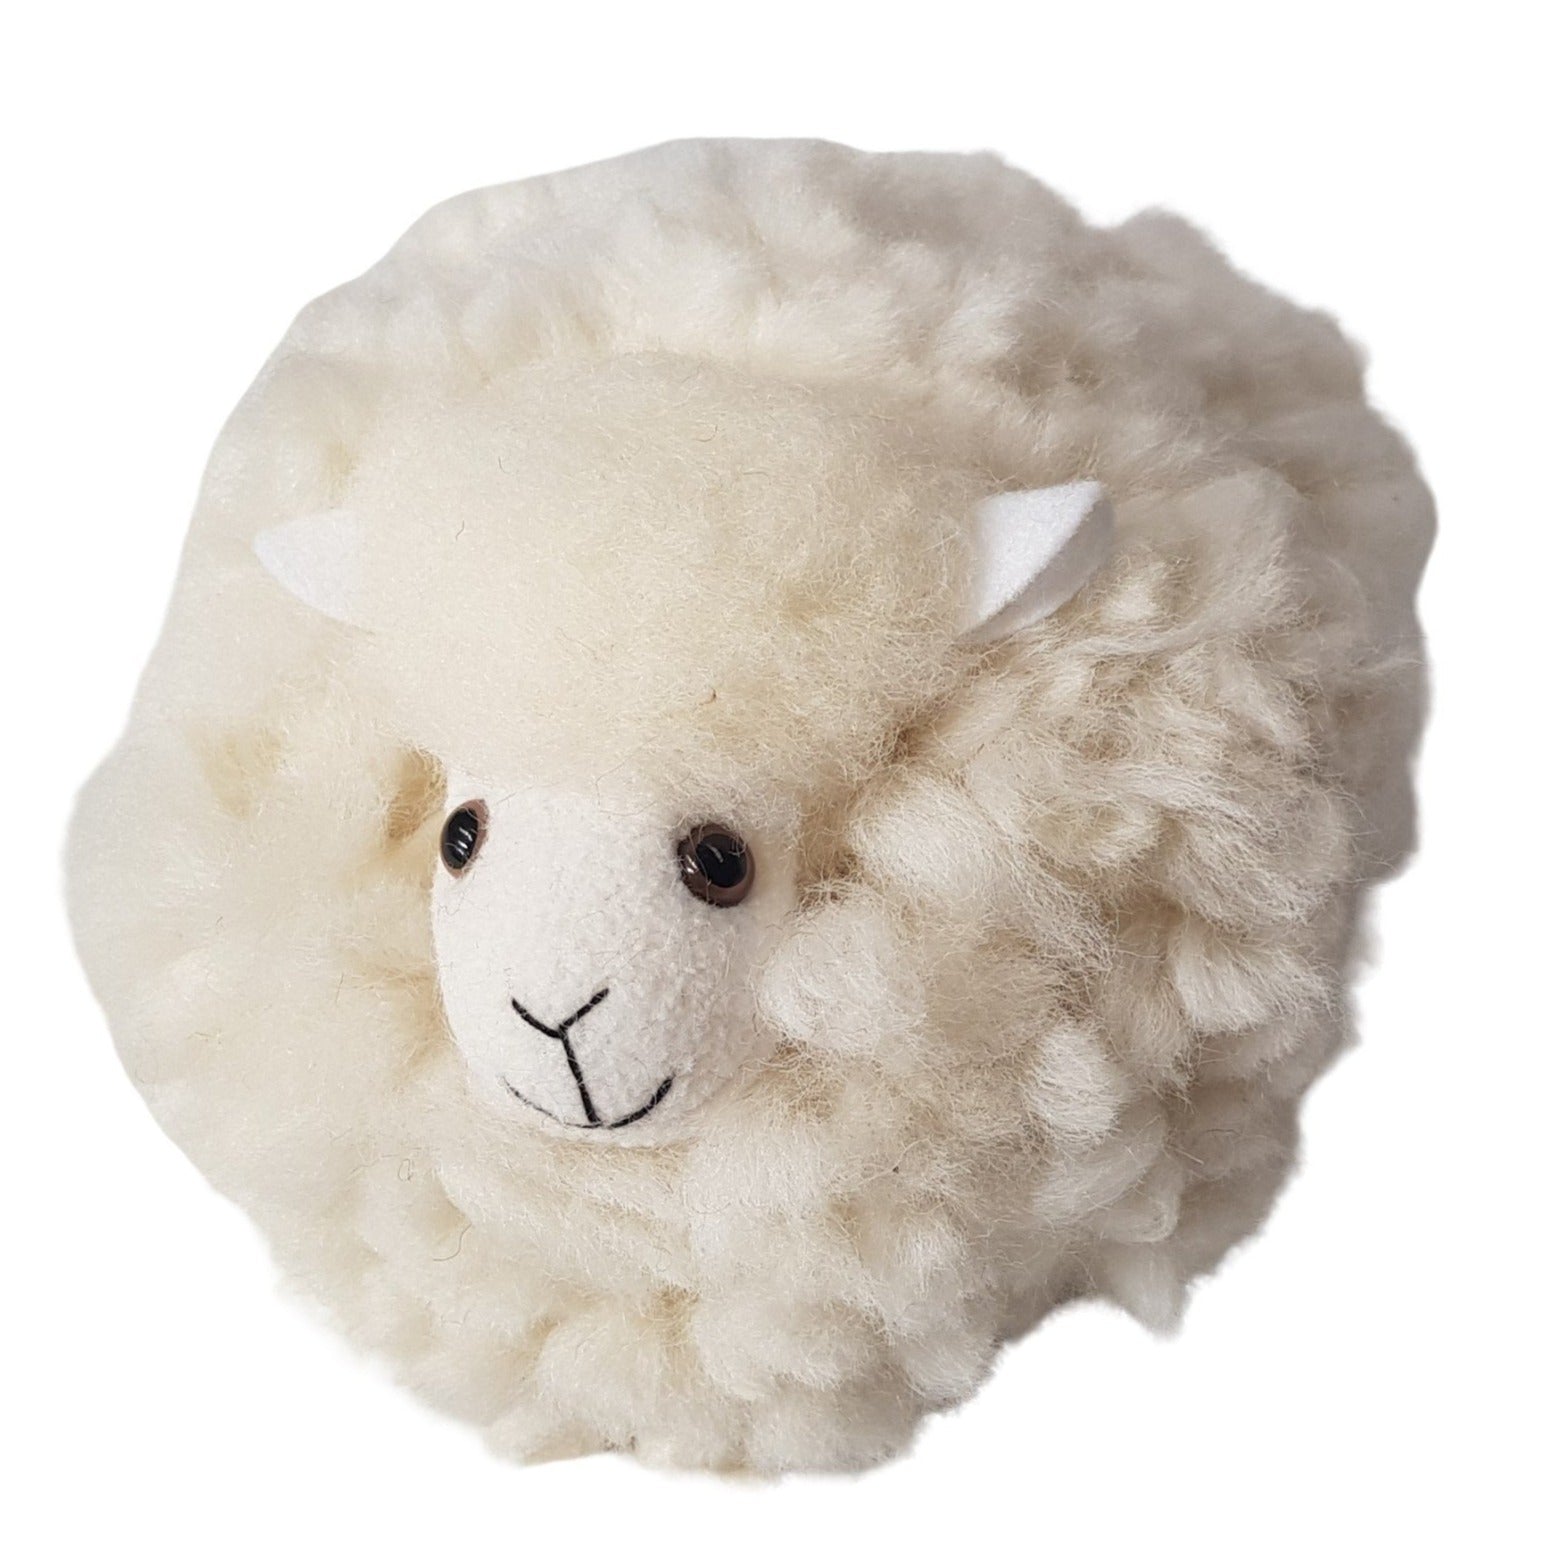 Pure wool toy sheep made in New Zealand